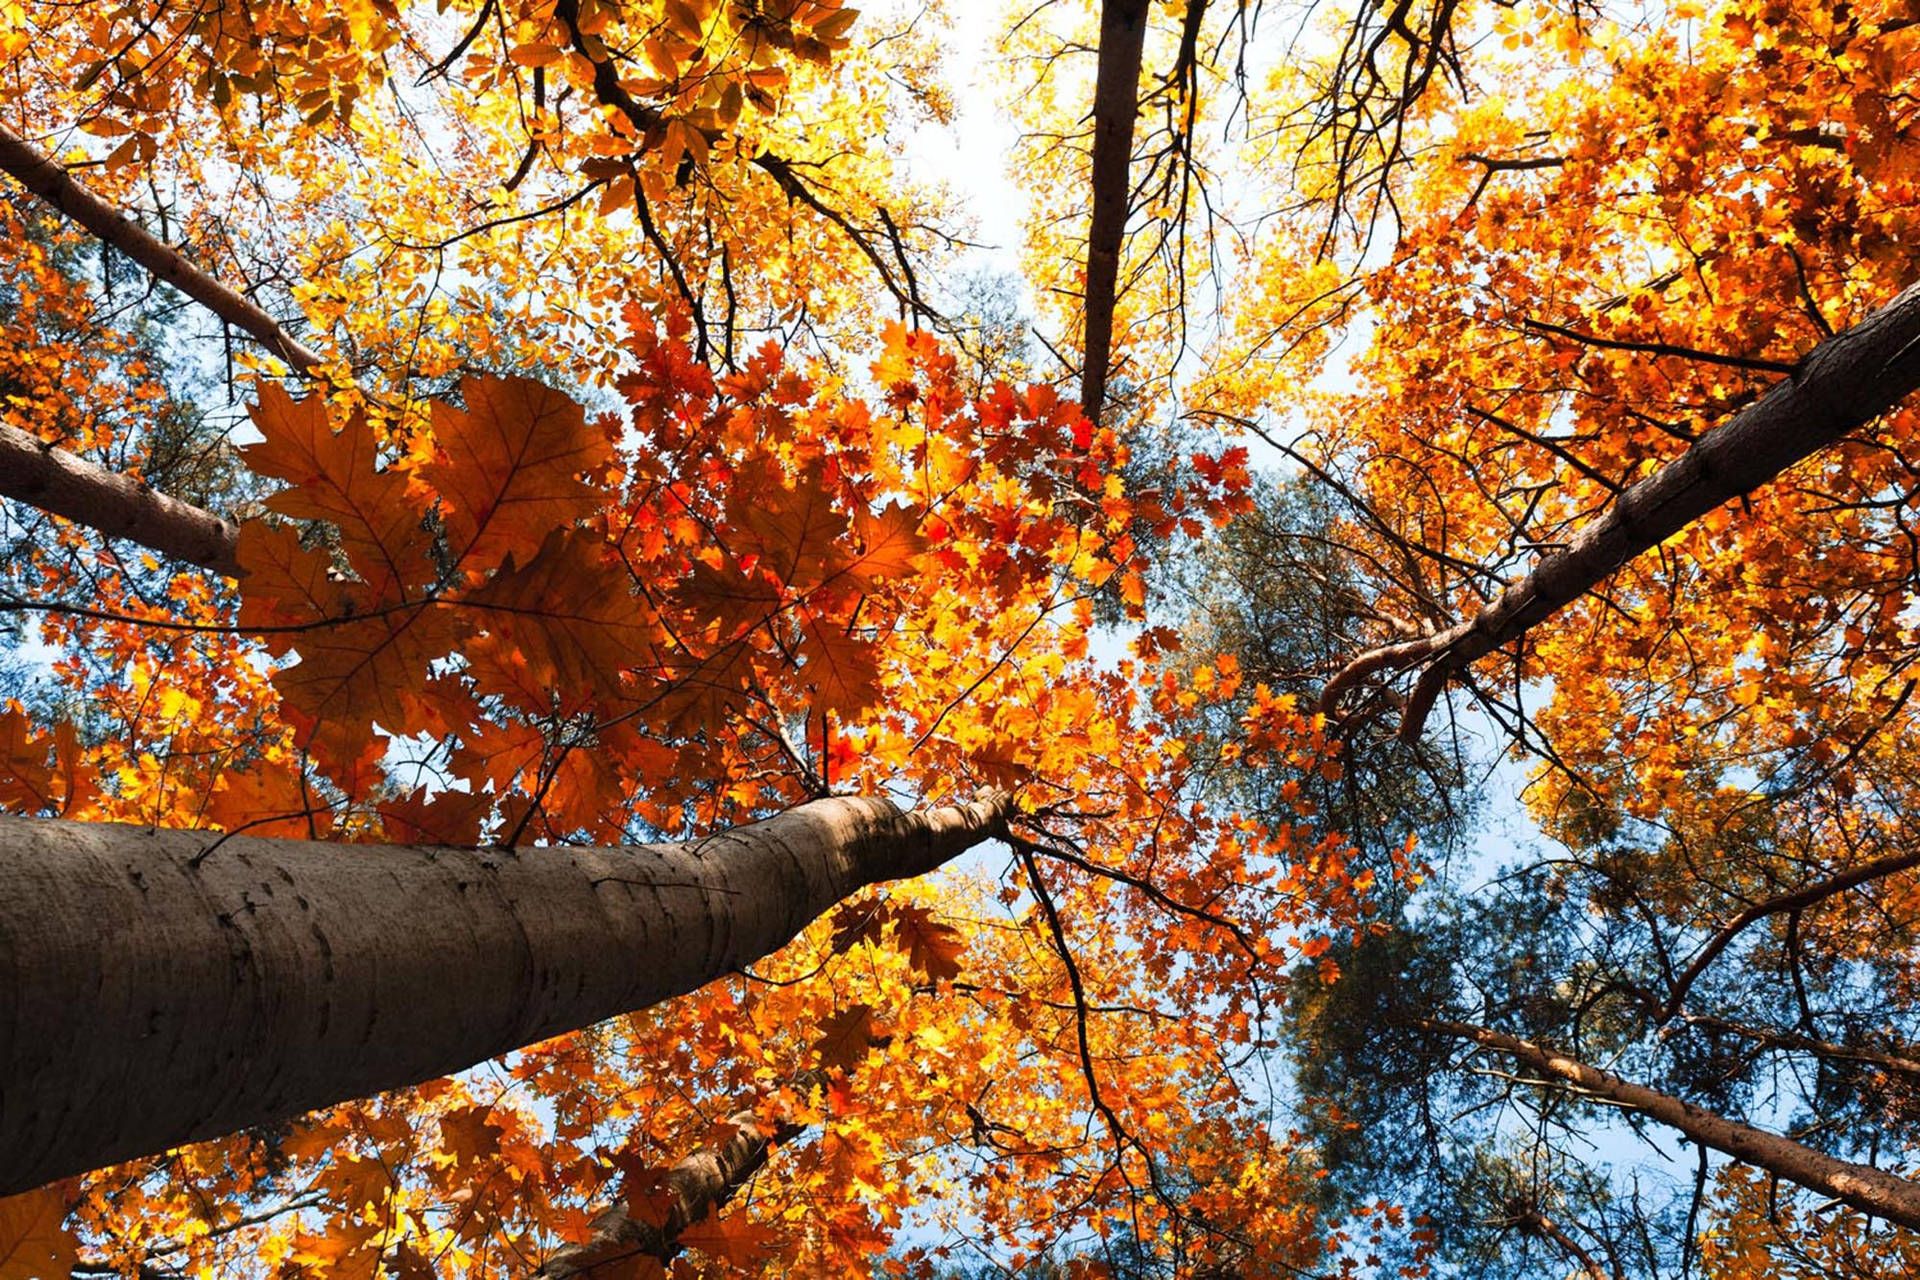 Looking up at a canopy of orange and yellow leaves - Fall